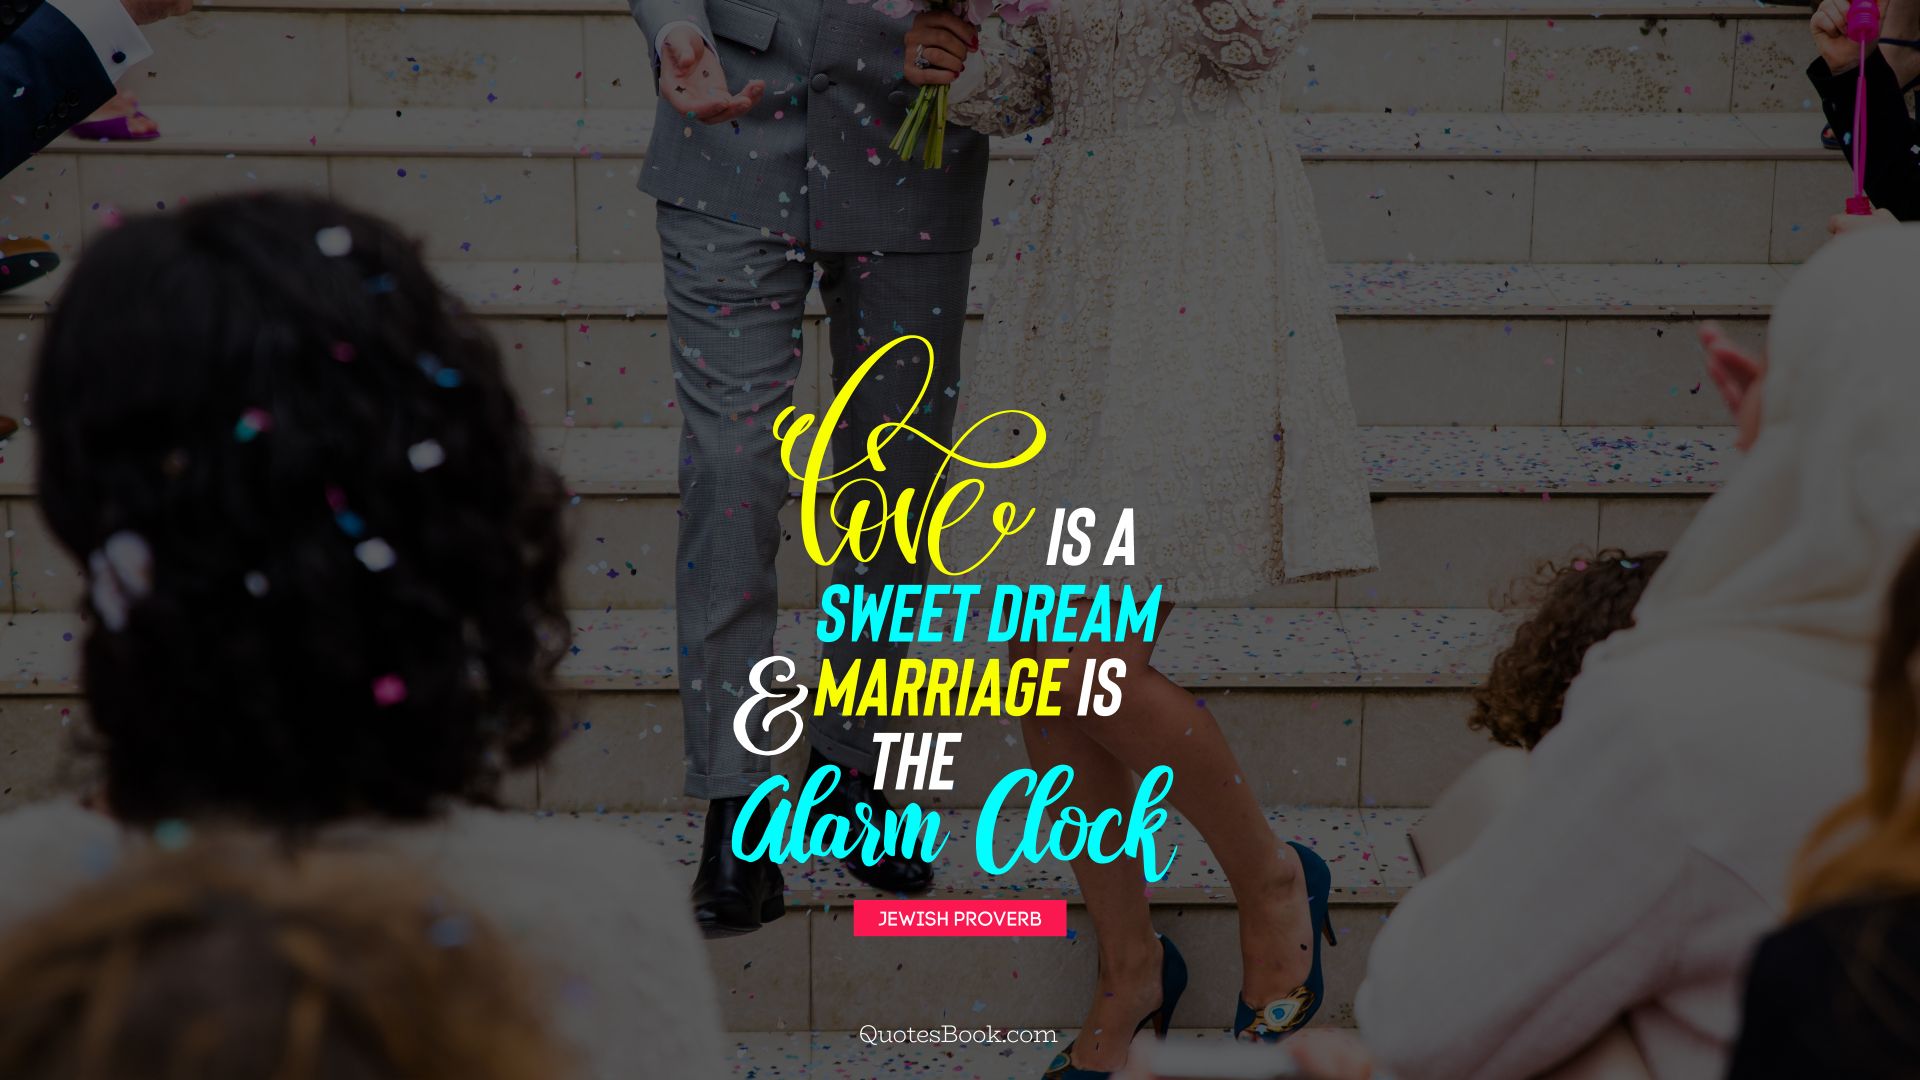 Love is a sweet dream and marriage is the alarm clock. - Quote by Jewish Proverb